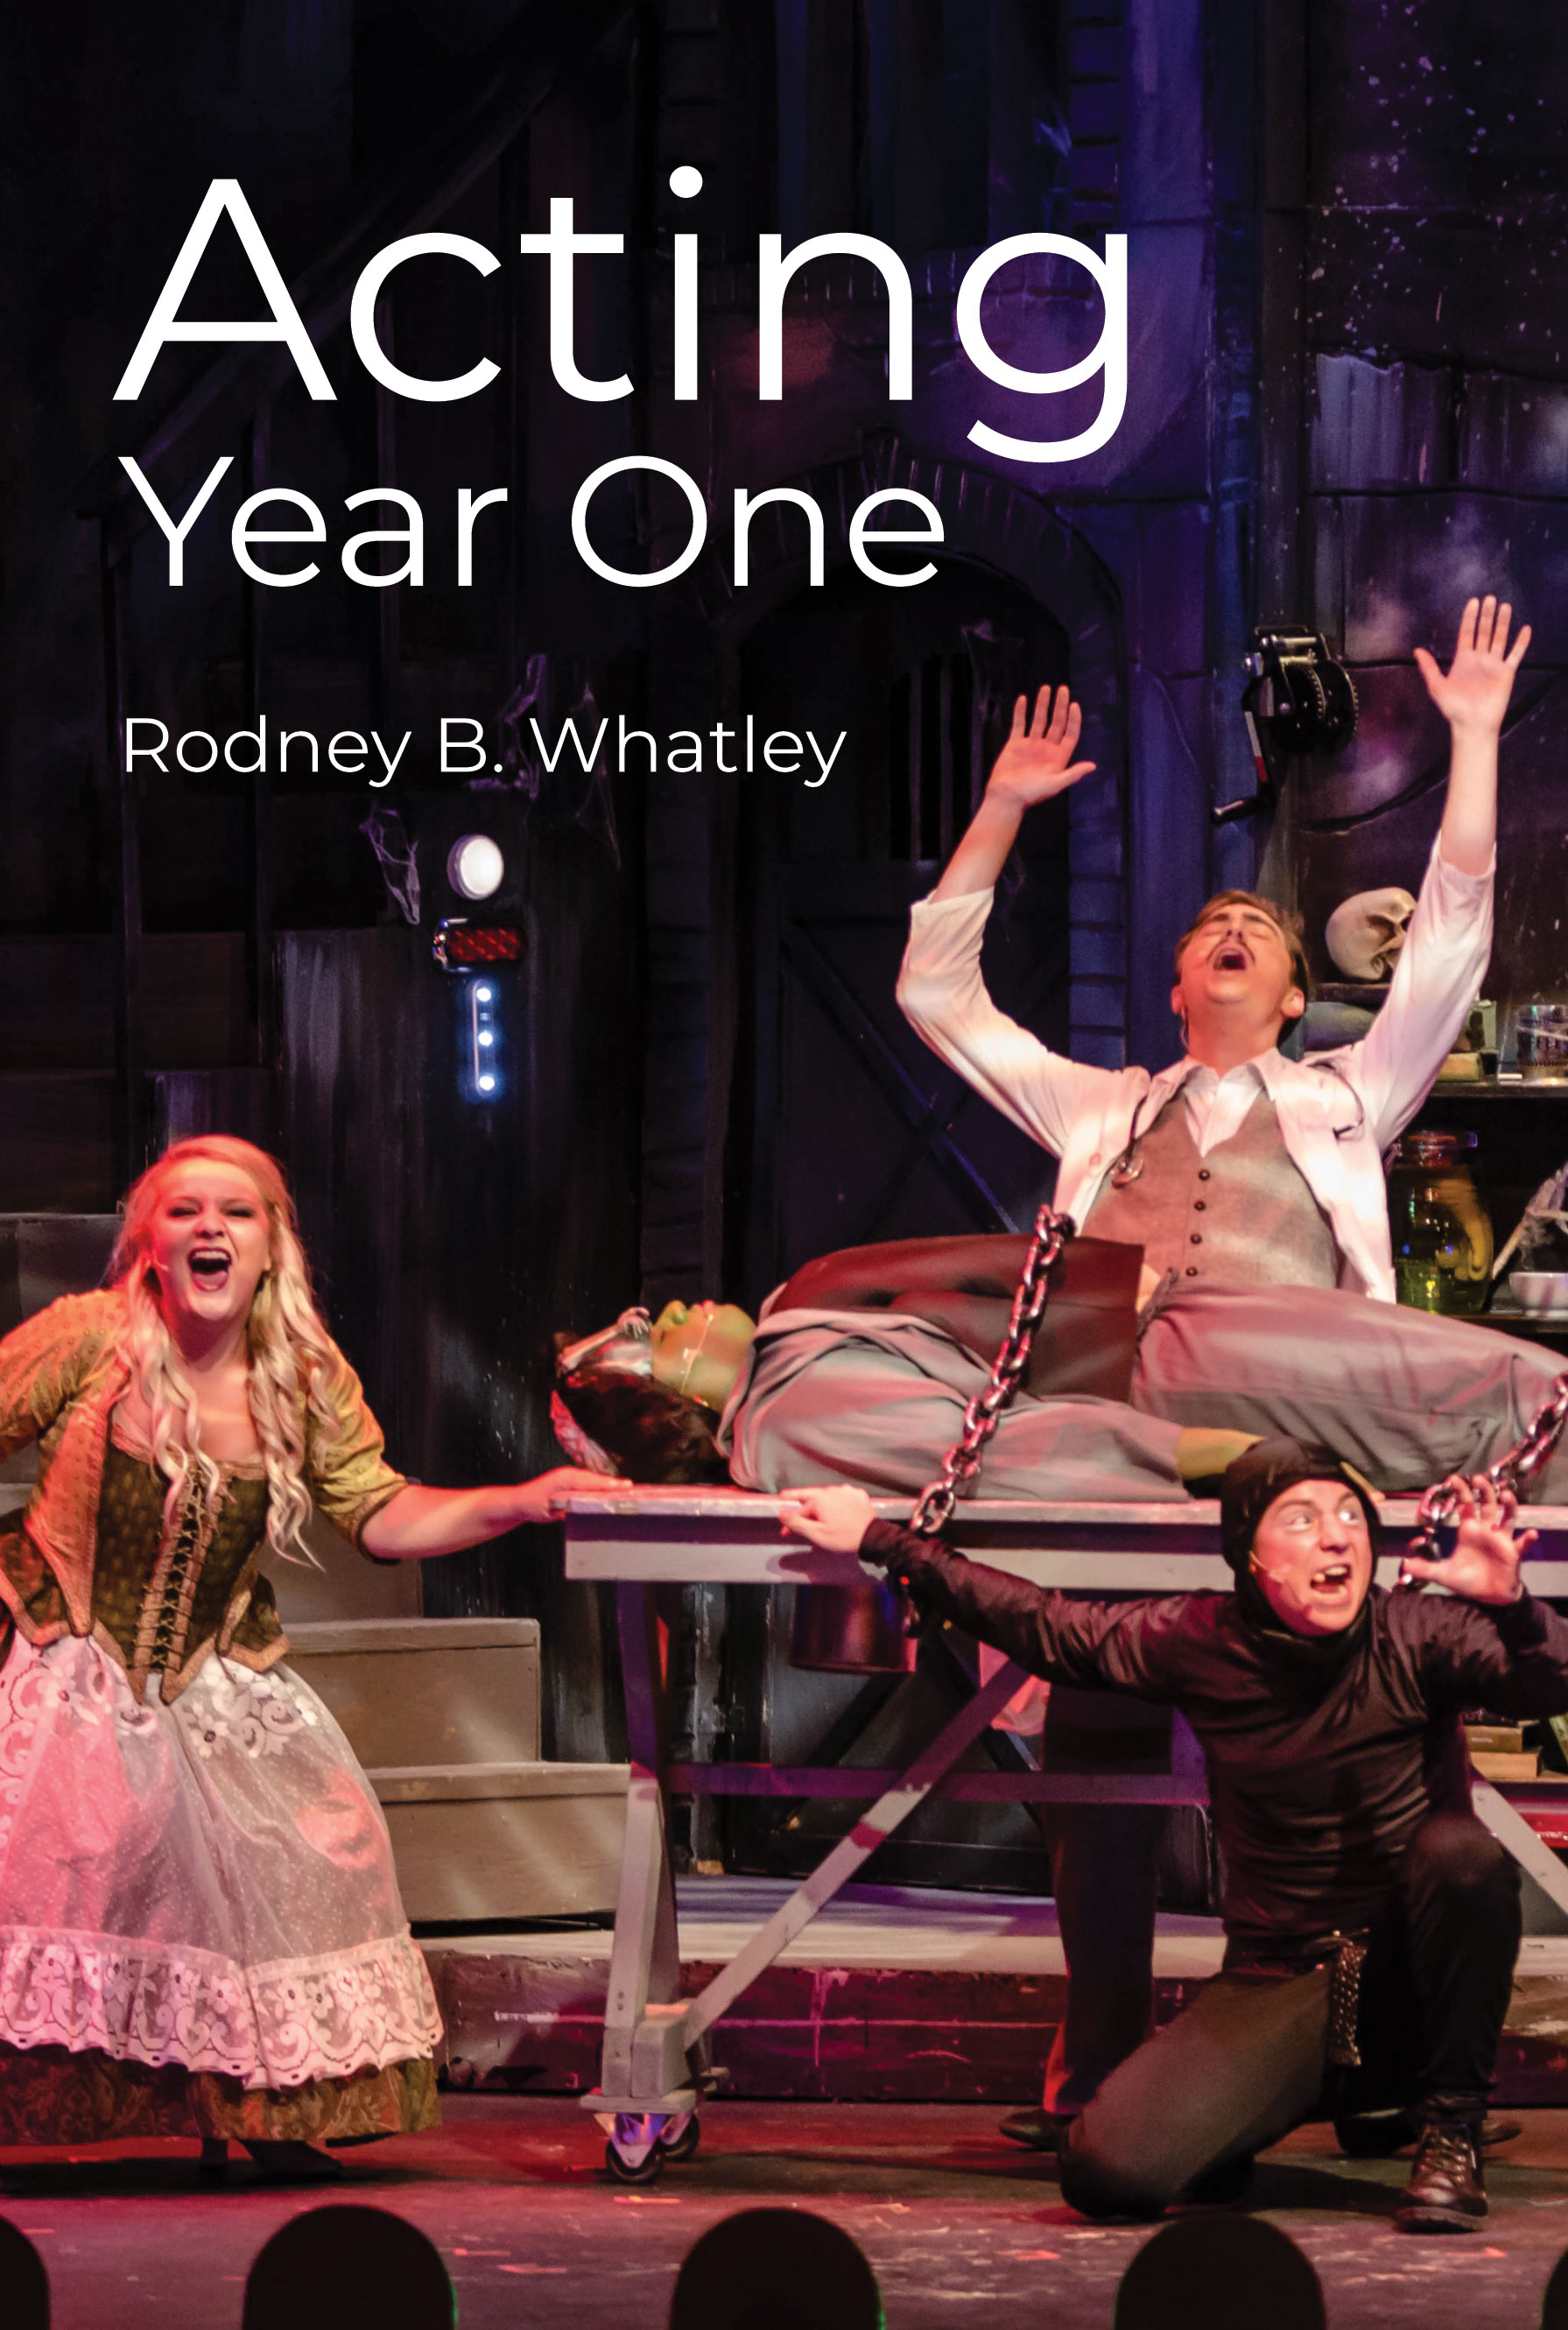 Acting: Year One by Rodney B. Whatley